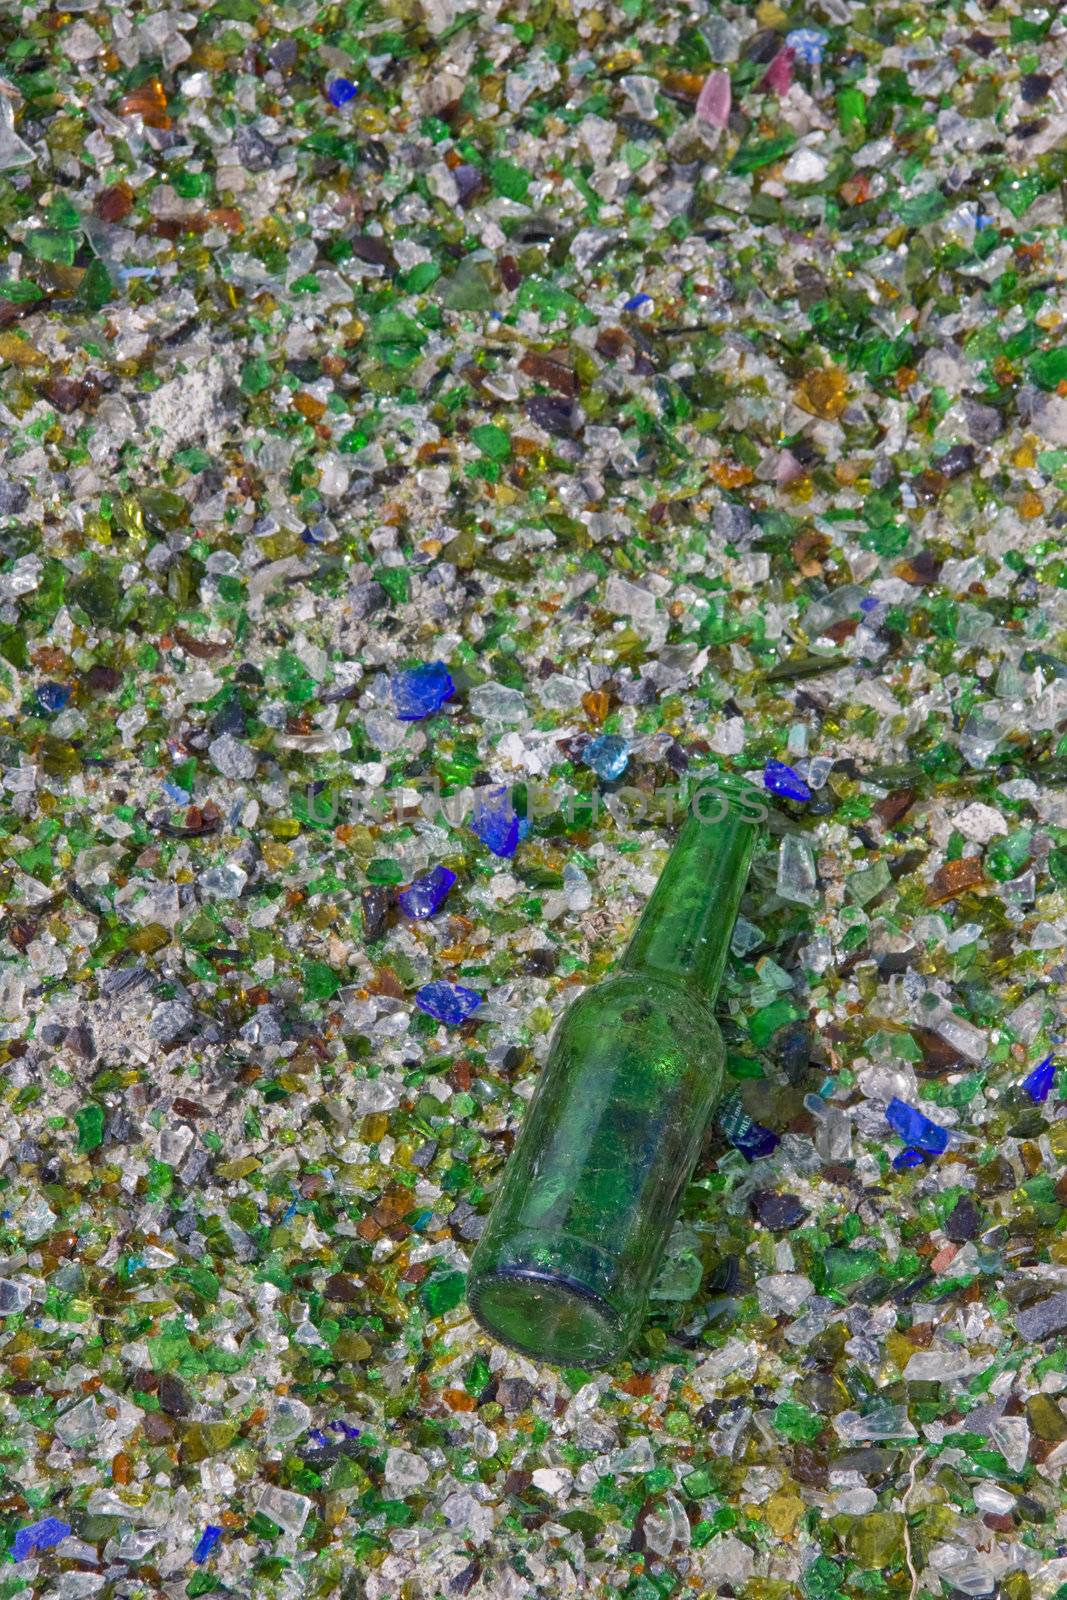 Bottle that escaped the crusher at a recycling plant